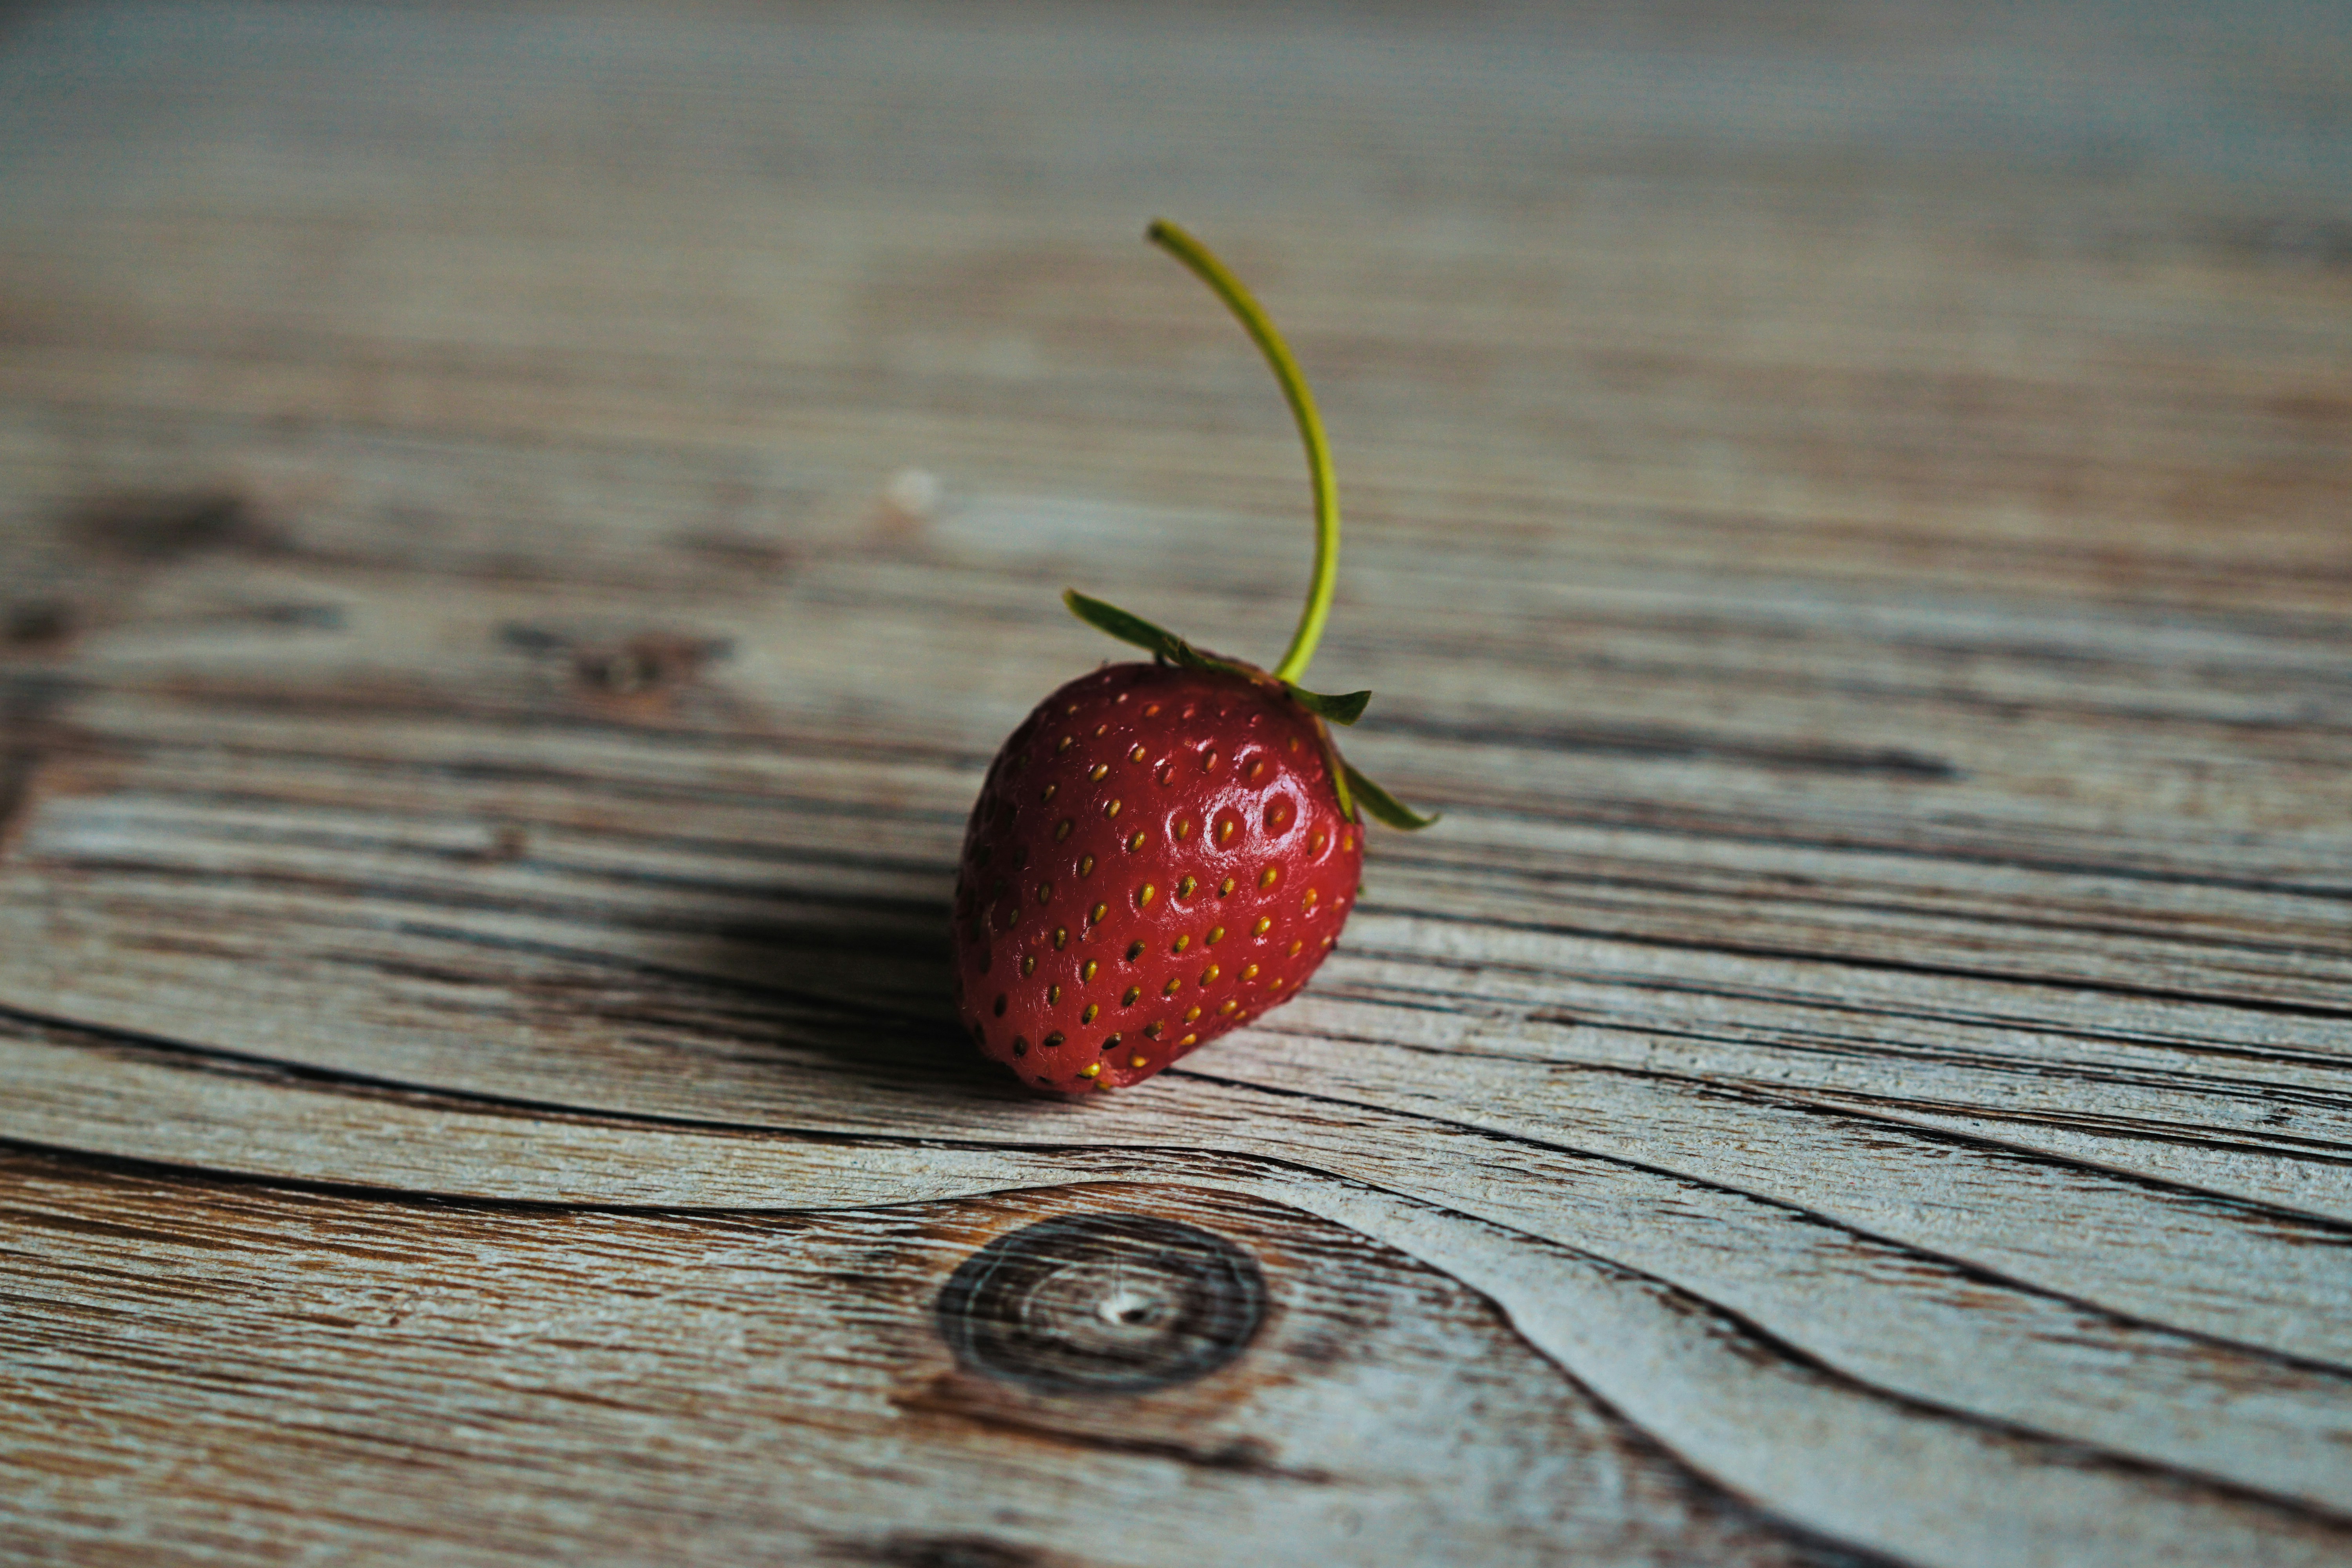 Go to your garden, plant strawberries, wait. Wait. Wait. Well, wait few days, weeks, and enjoy your strawberries. This one is the first one from my garden.